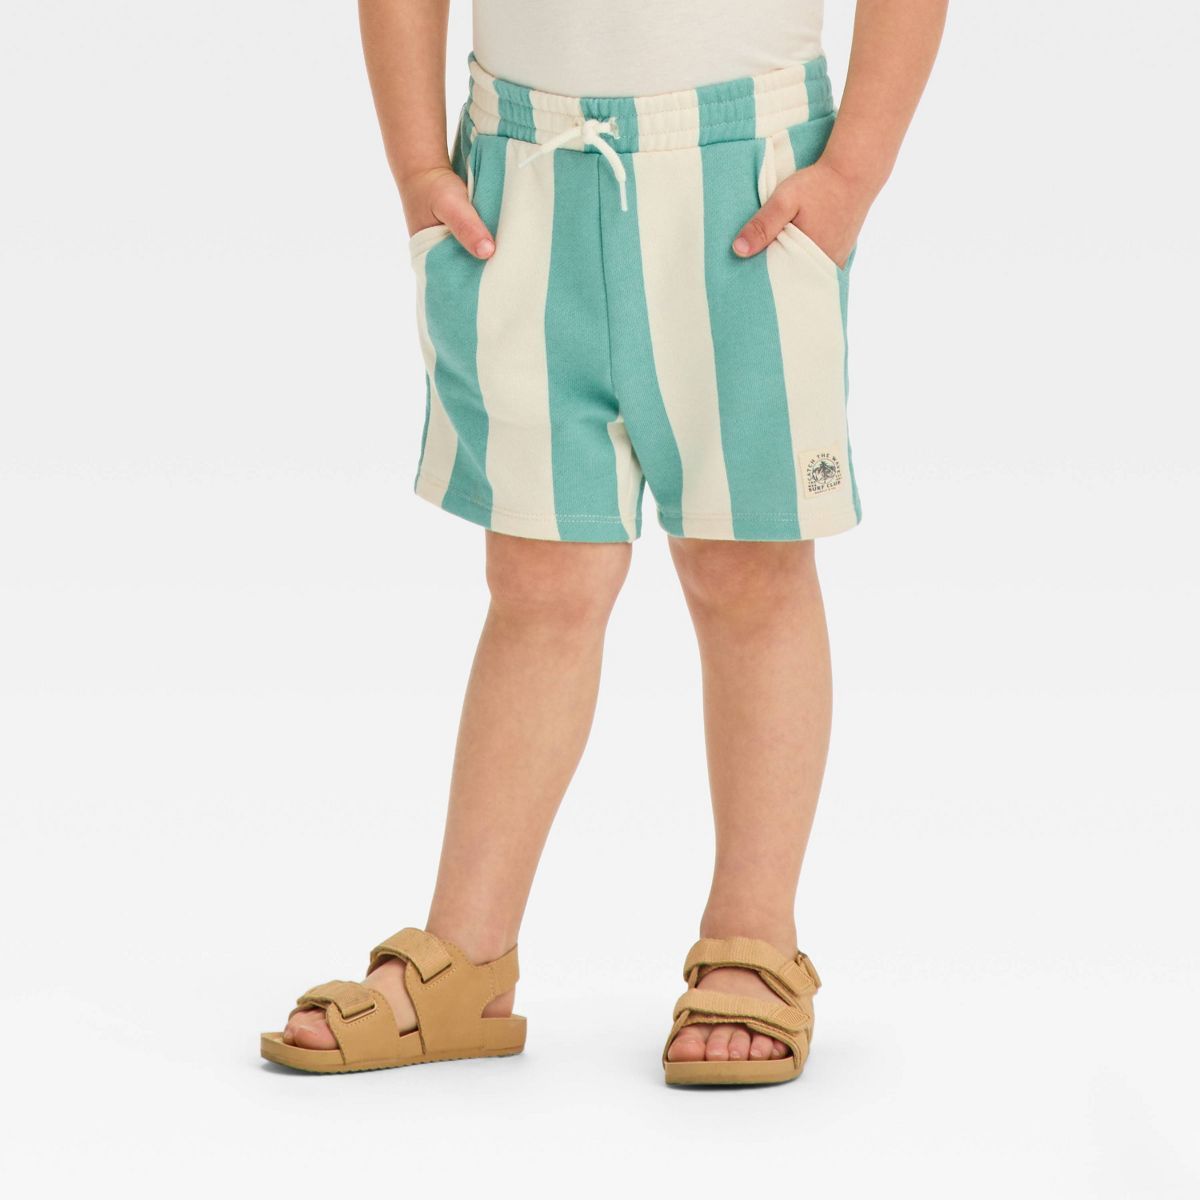 Grayson Mini Toddler Boys' Teal Striped Pull-On Cargo Shorts - Blue 5T | Target